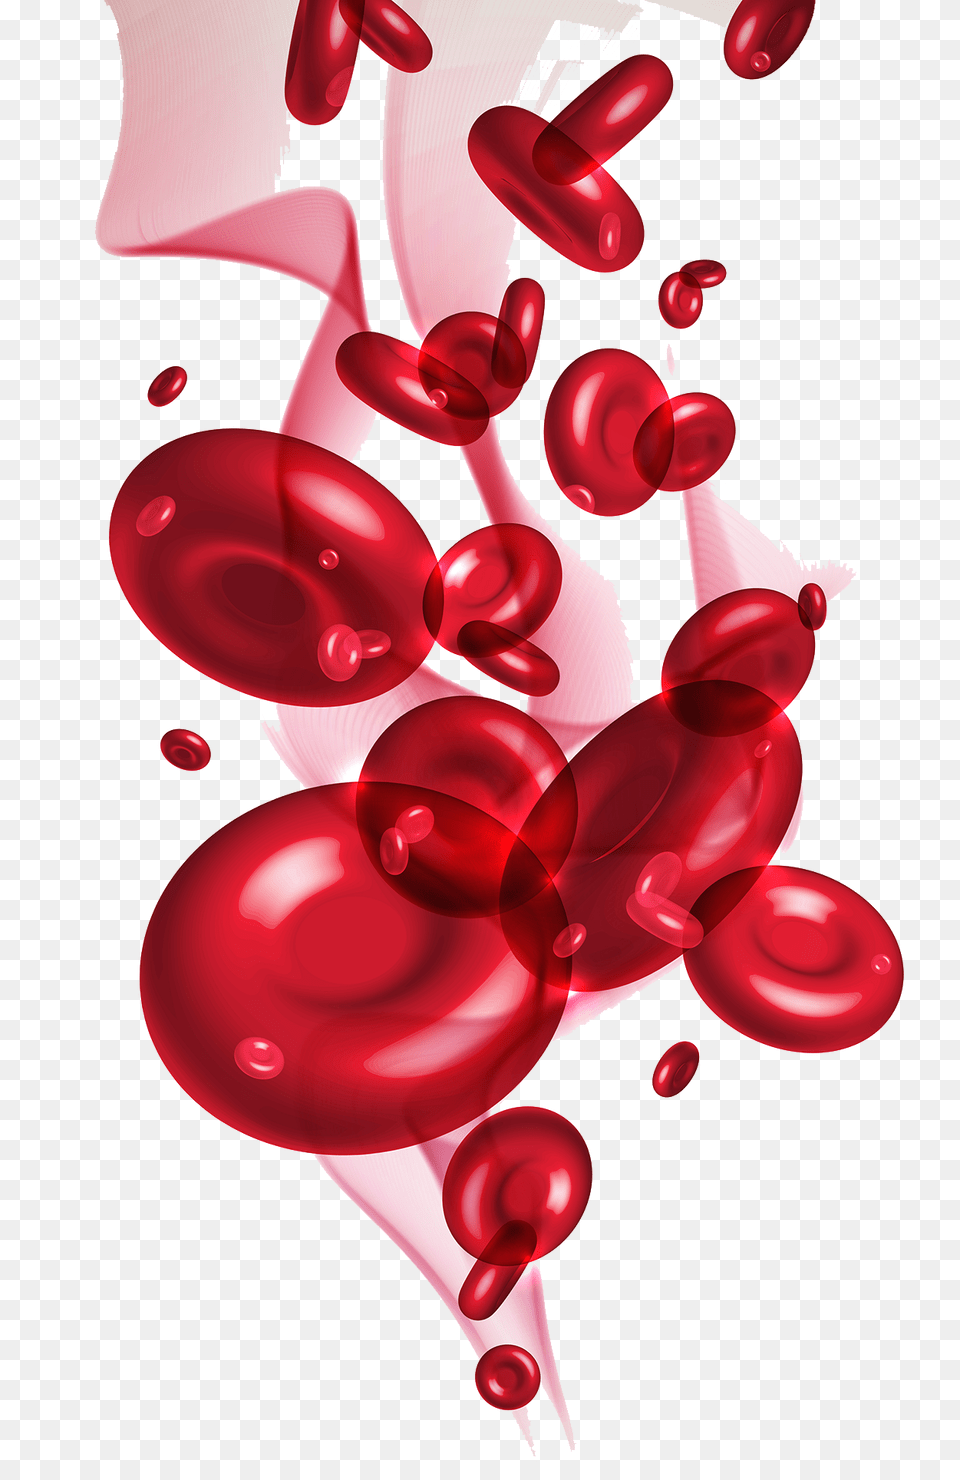 Pool Of Blood Blood Cells Image, Art, Balloon, Graphics, Chandelier Free Png Download